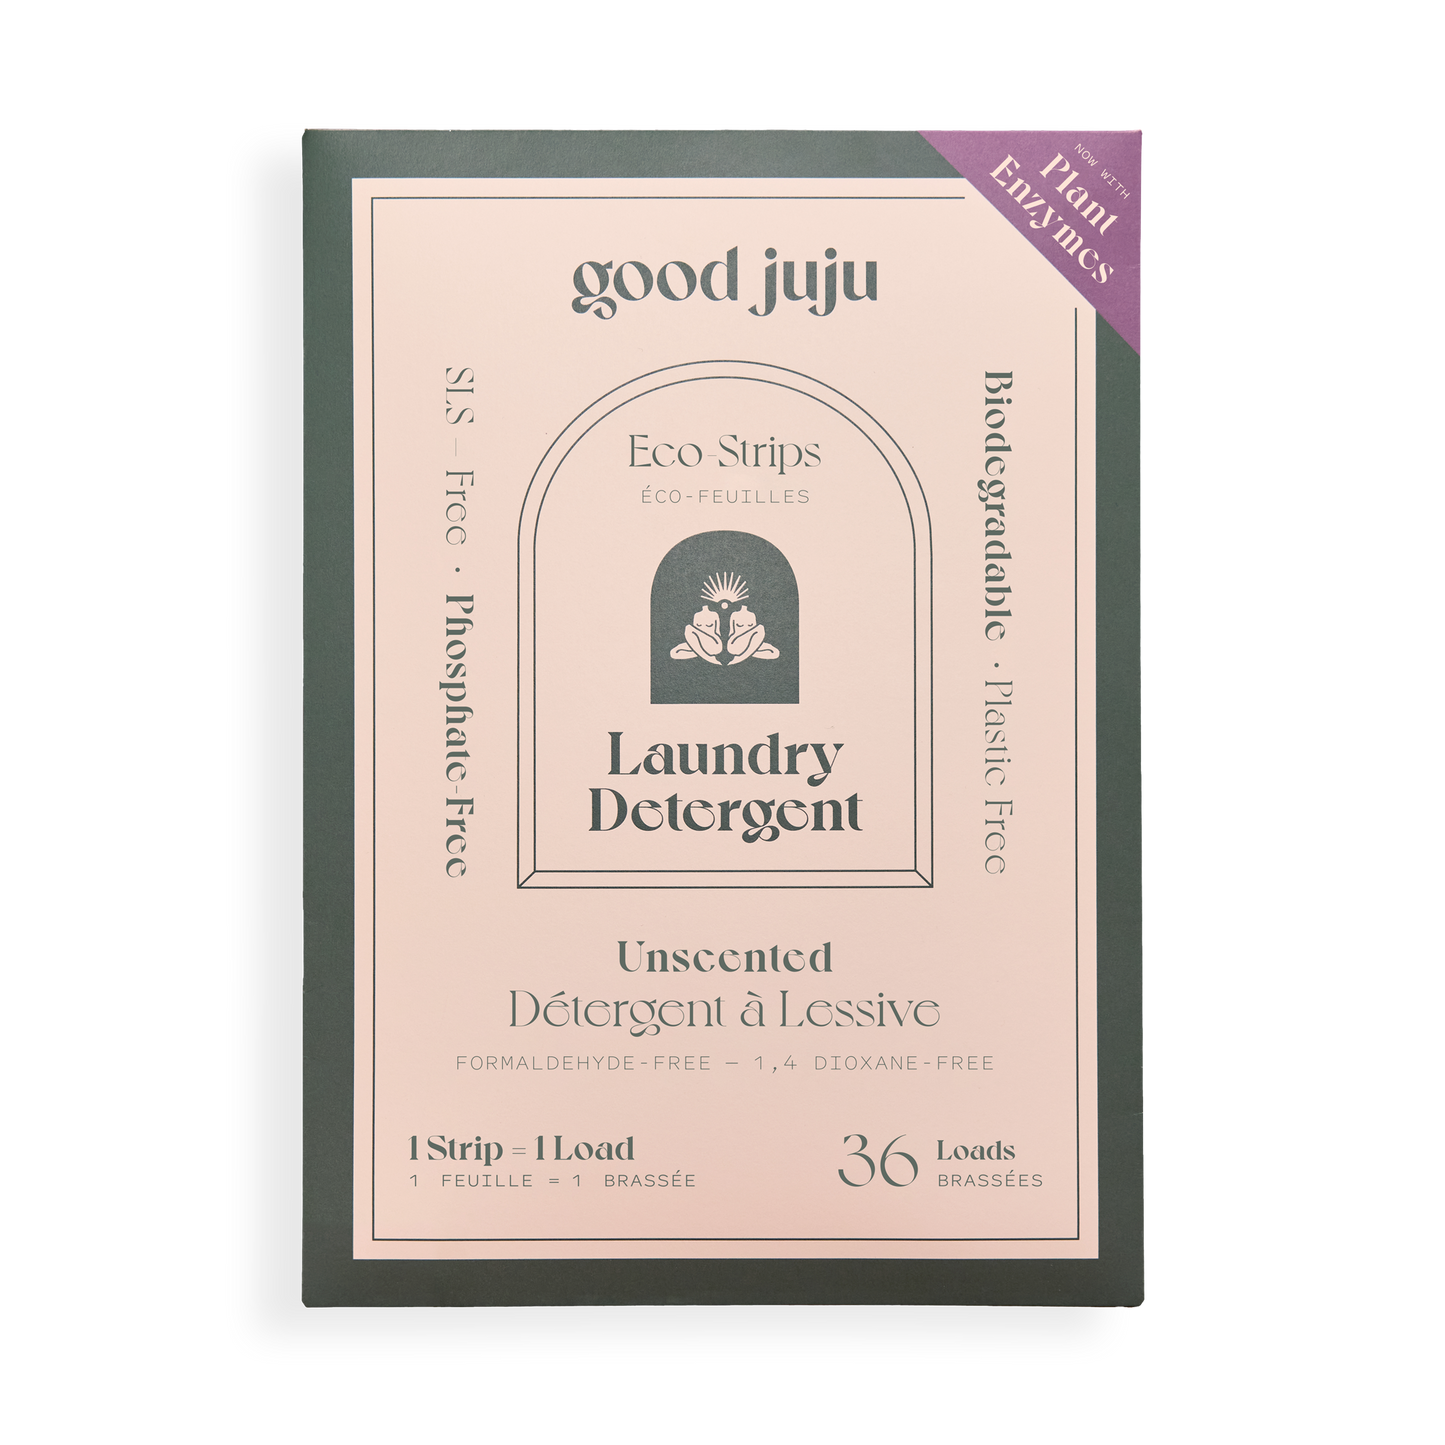 Good Juju Body & Home - Laundry Detergent Eco-Strips Unscented